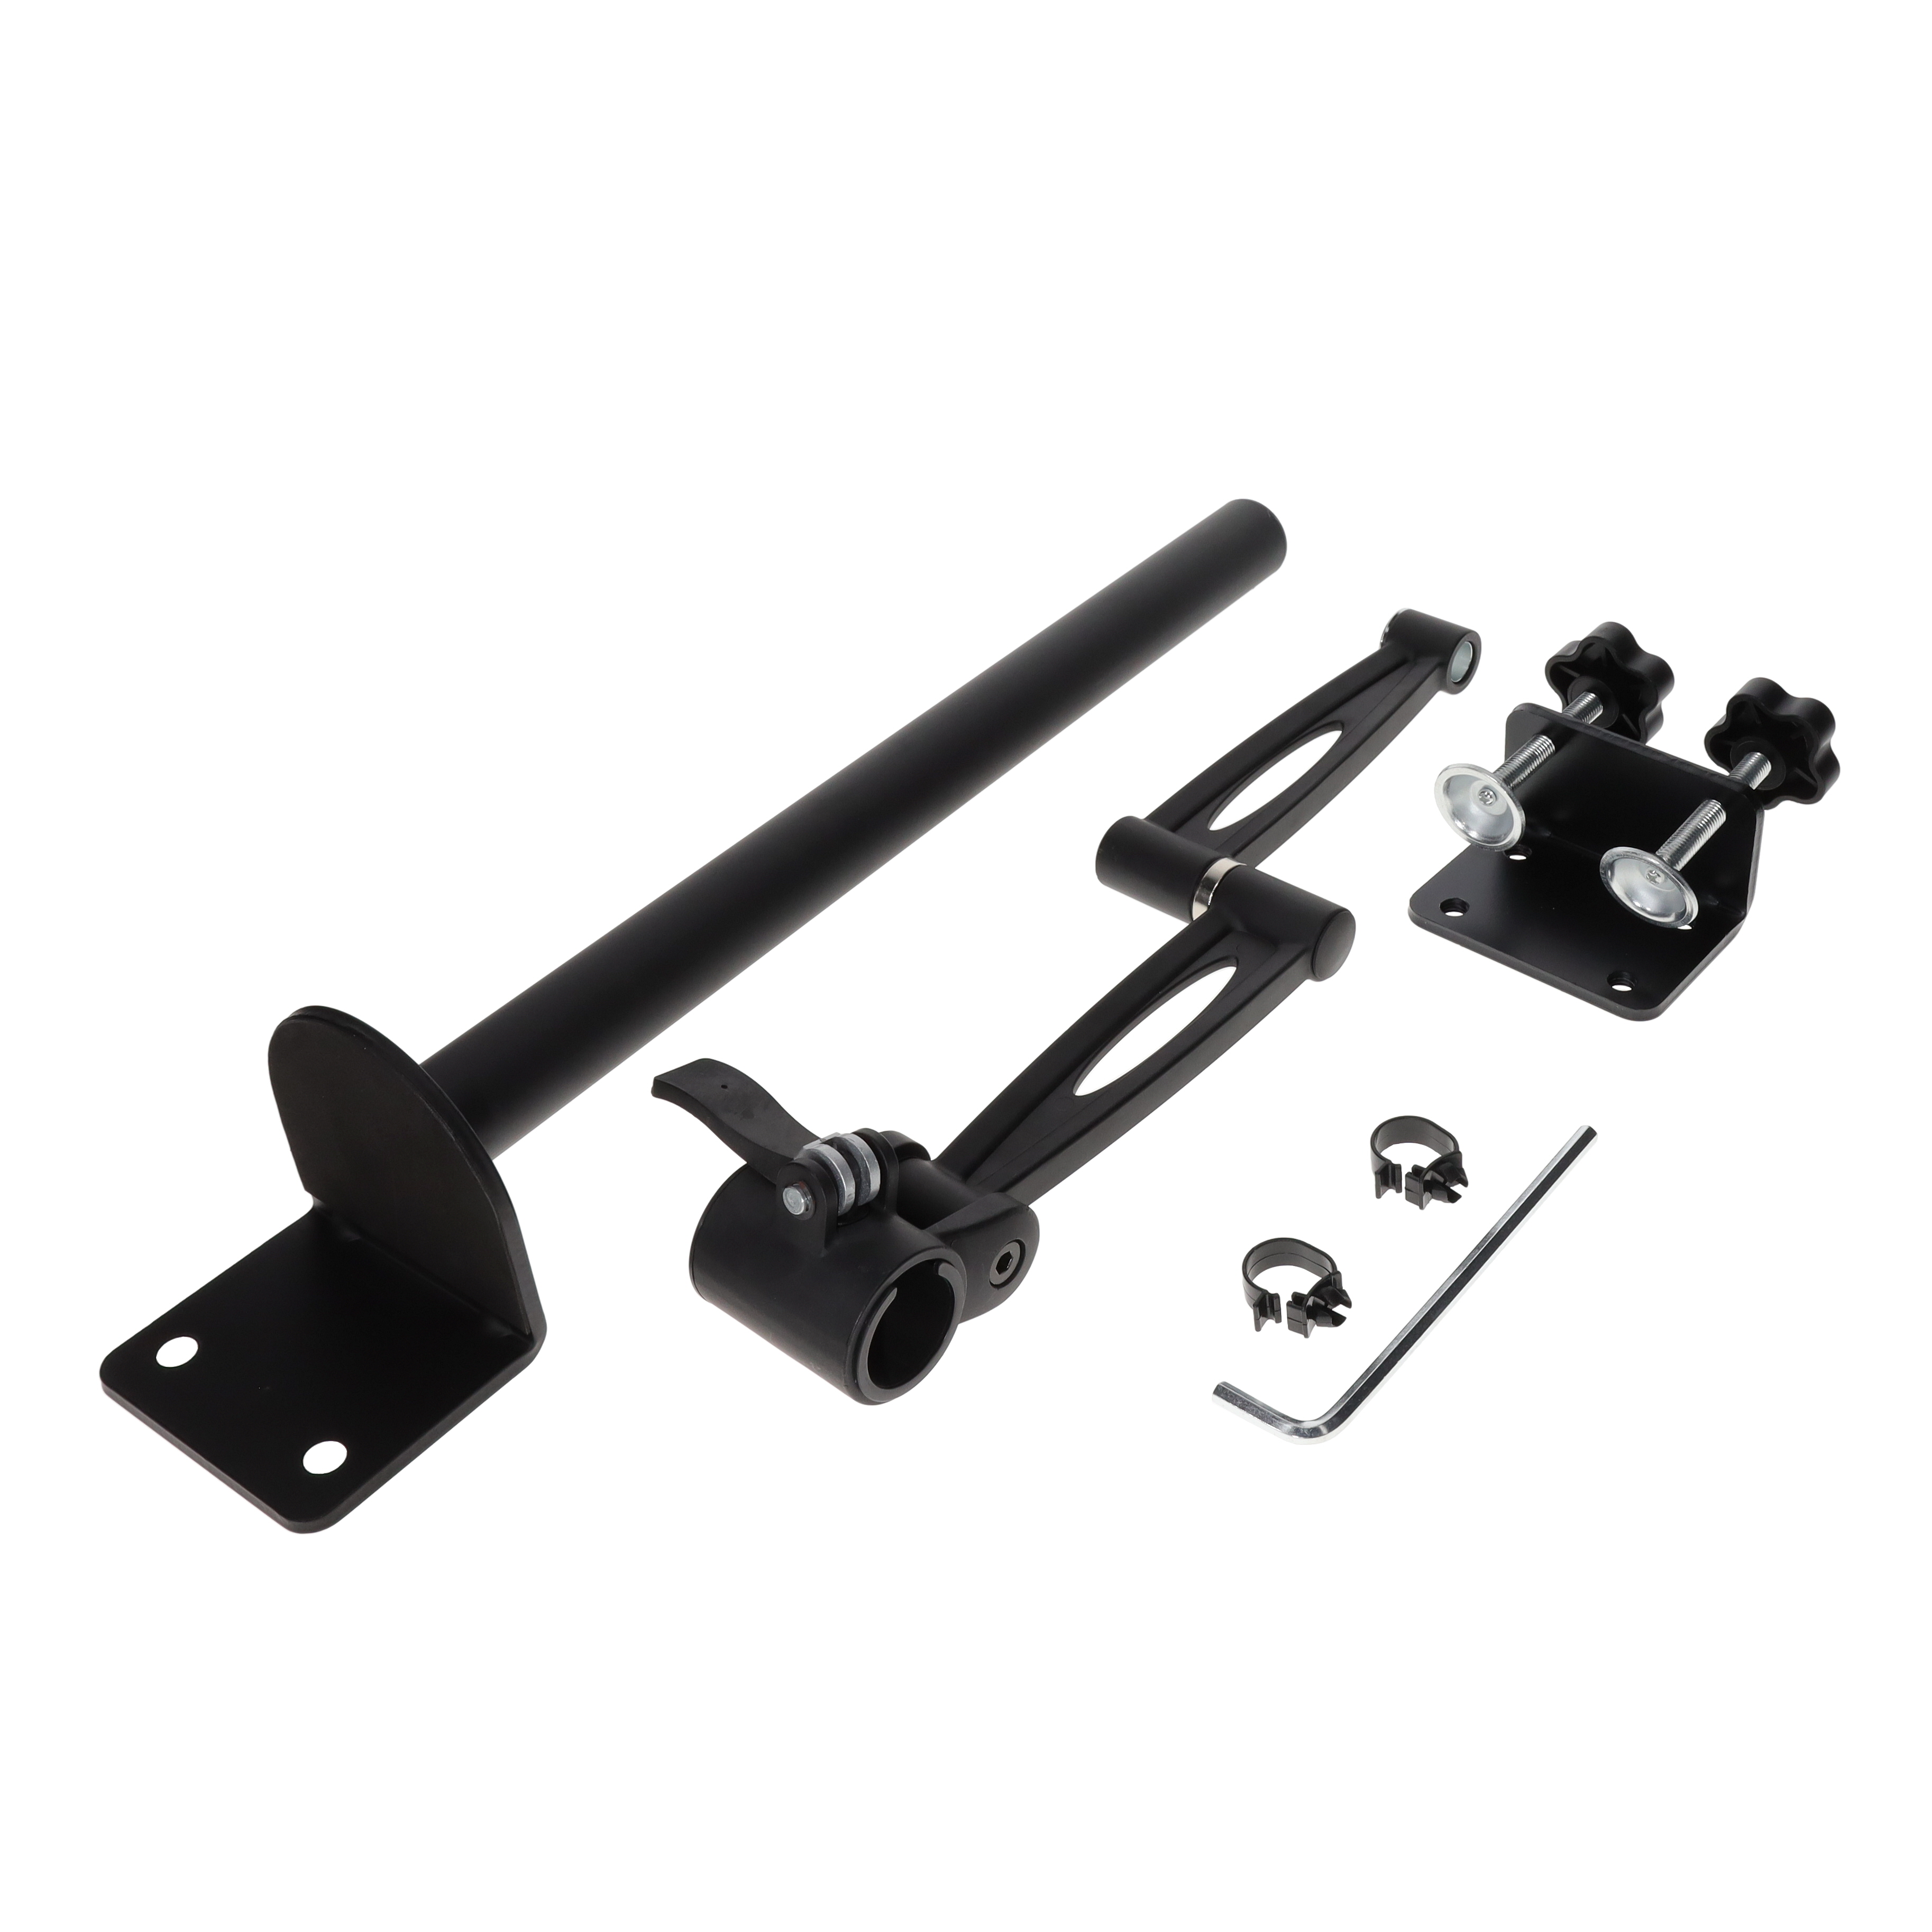 【26800B-553】ARTICULATING ARM POST MNT/CLAMP